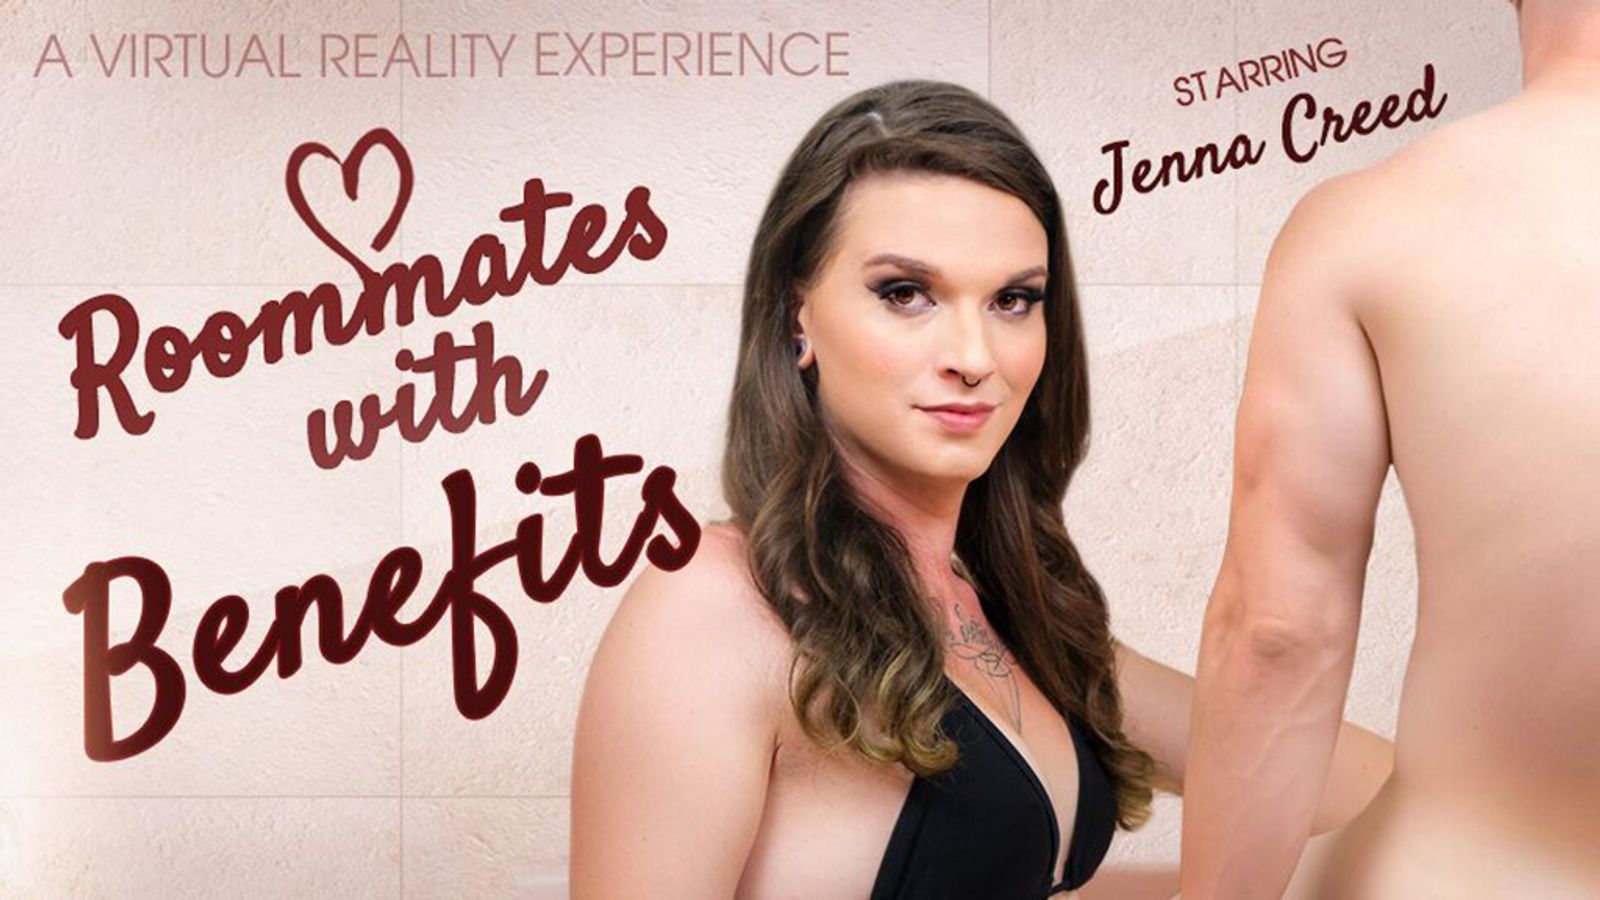 Jenna Creed Is One Of VR Bangers Trans' 'Roommates With Benefits'